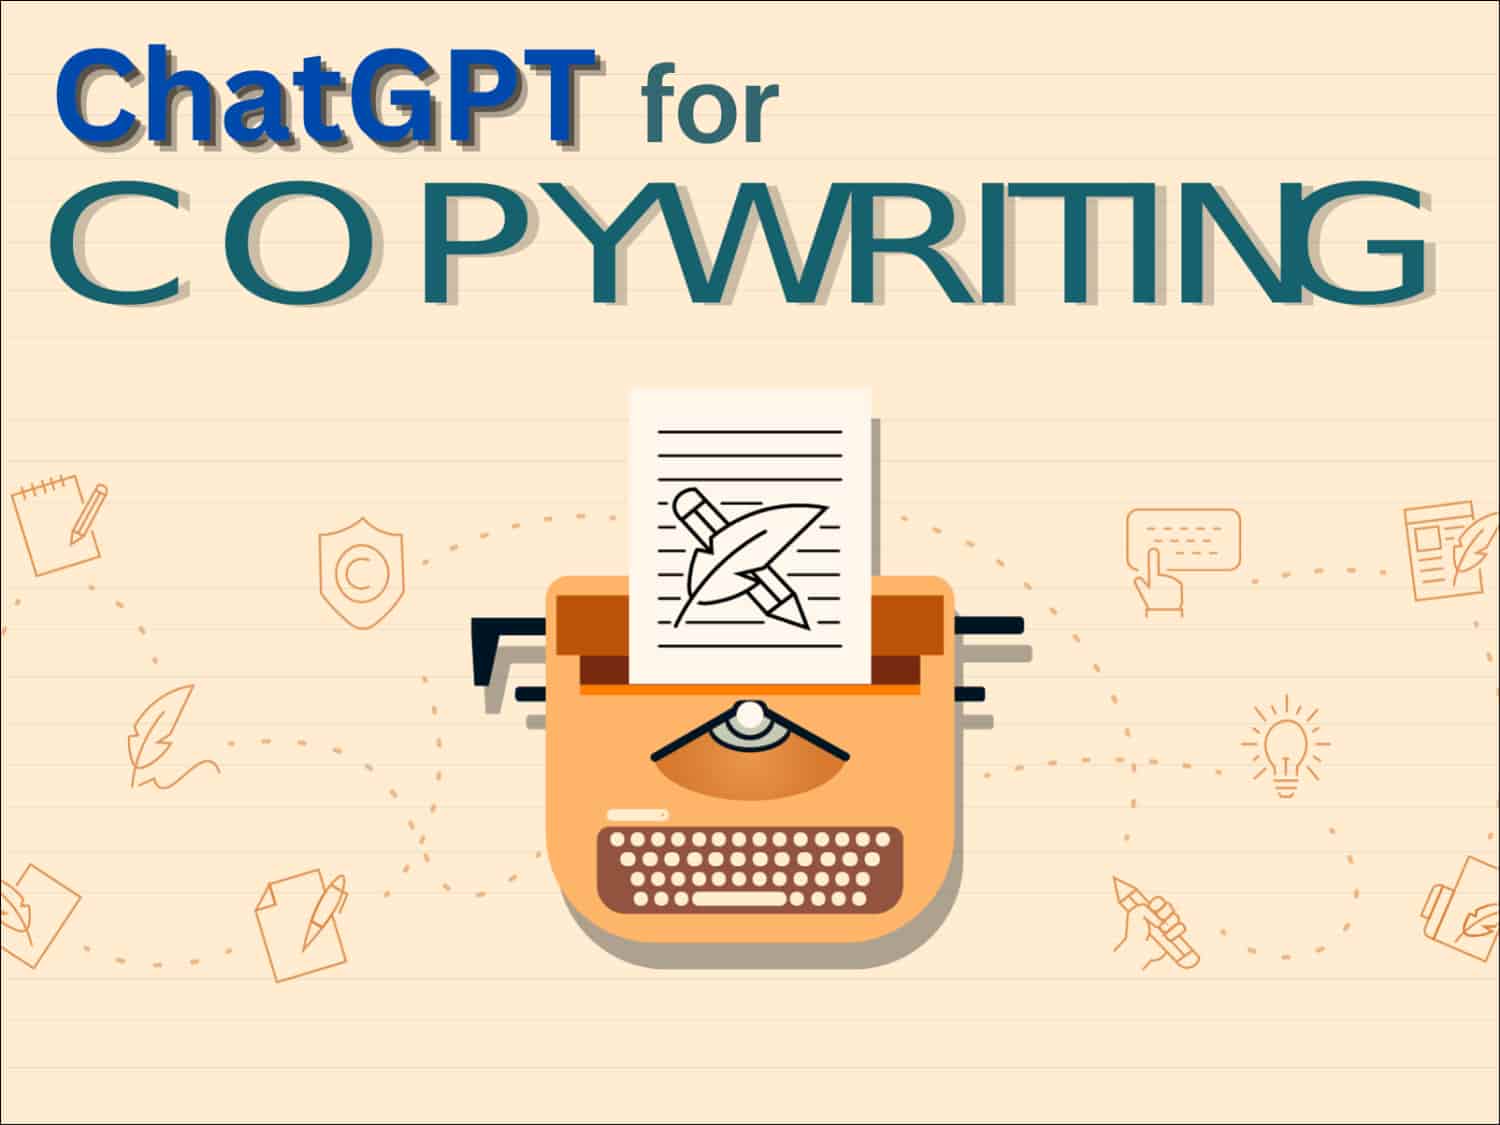 How to use ChatGPT for copywriting